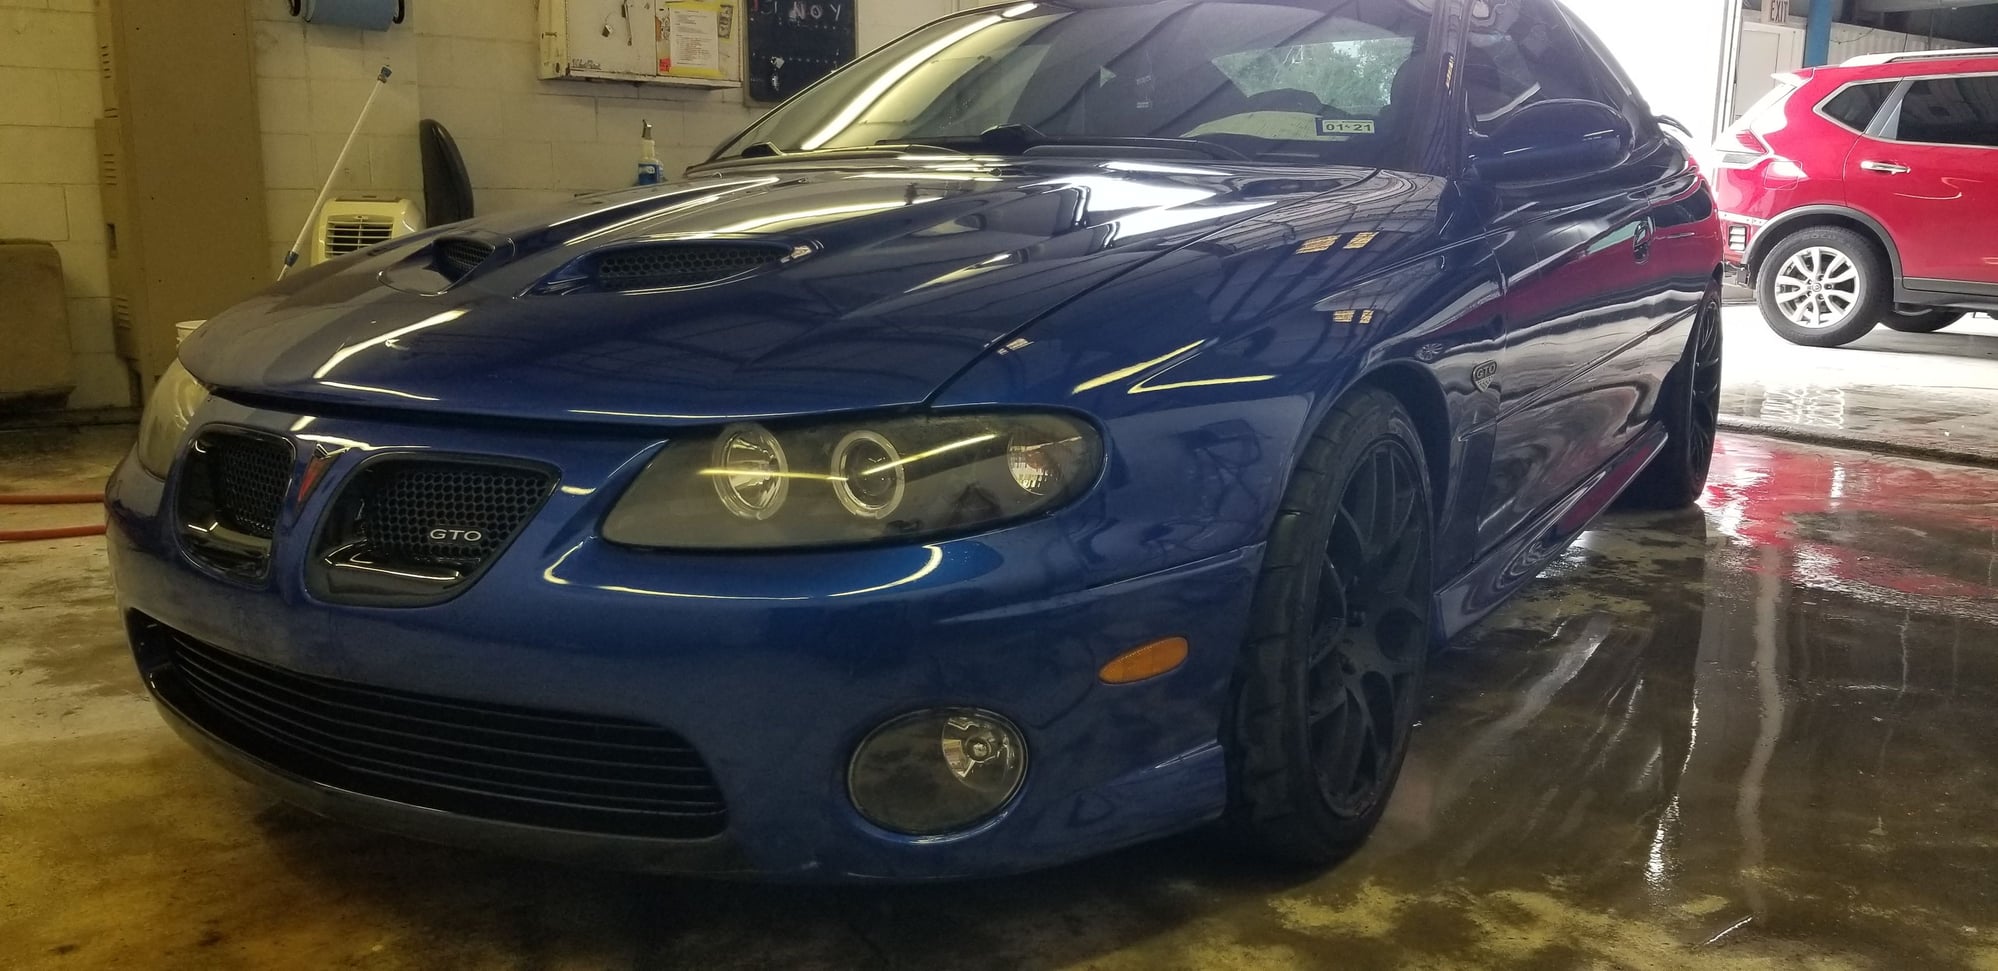 2006 Pontiac GTO - 2006 tvs2300 supercharger GTO - Used - VIN 6G2VX12U96L528156 - 125,629 Miles - 8 cyl - 2WD - Manual - Coupe - Blue - Katy, TX 77493, United States